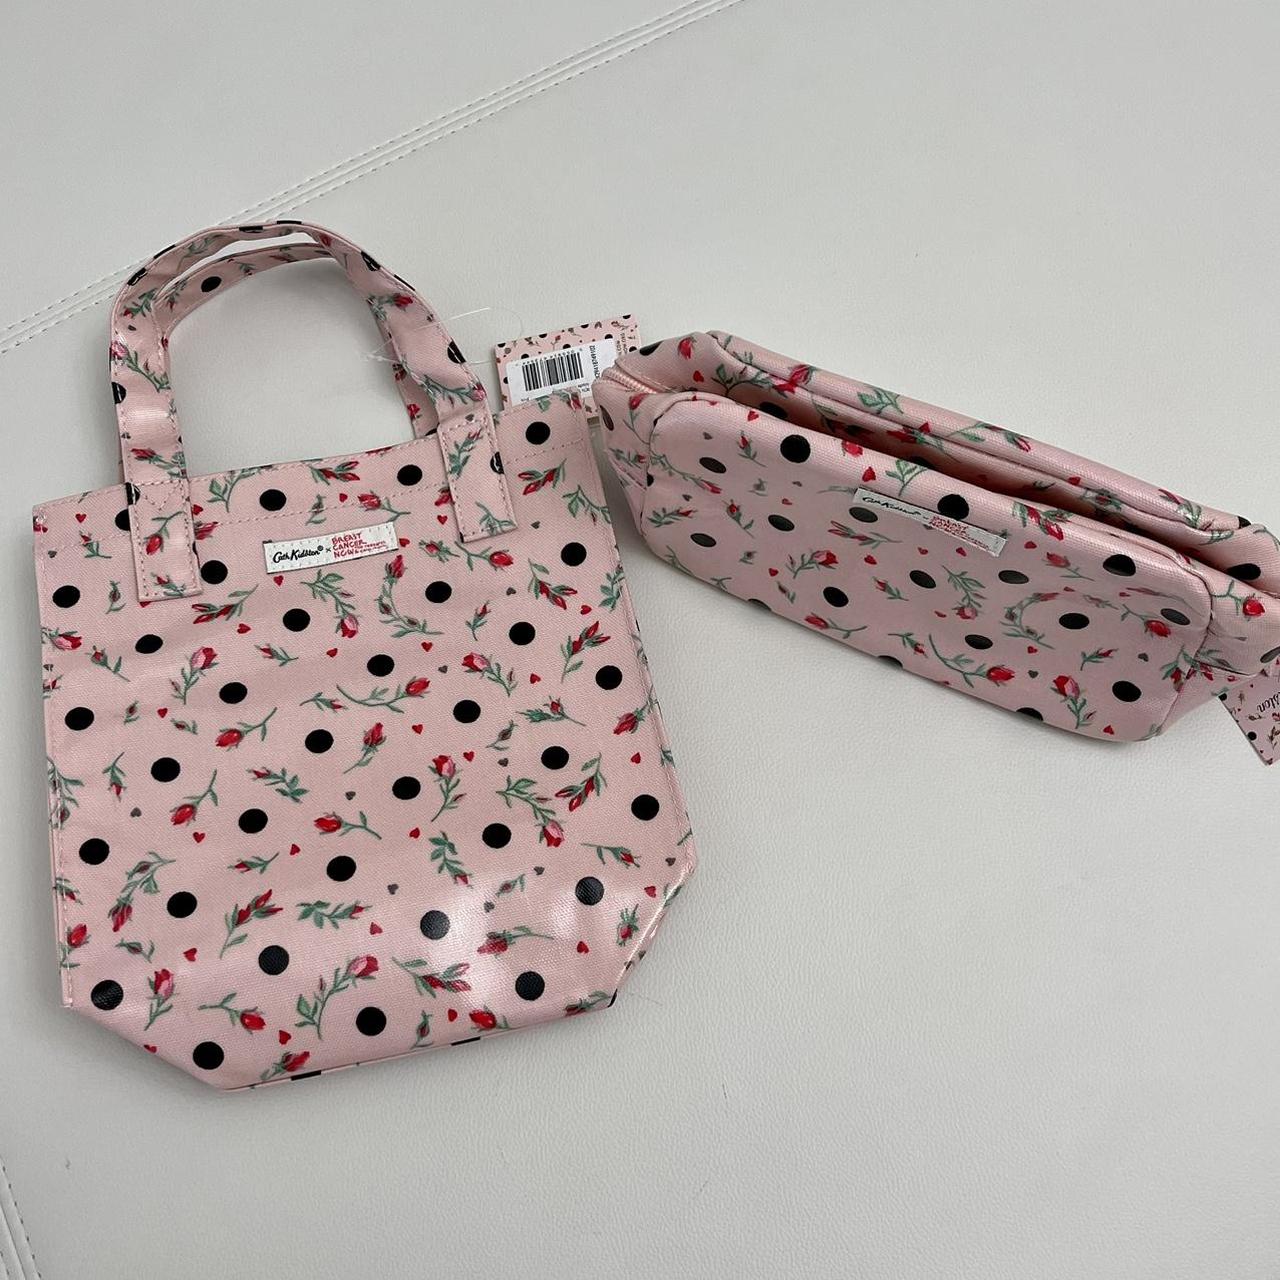 Cath Kidston Pink and Brown Laptop-cases-bag (2)